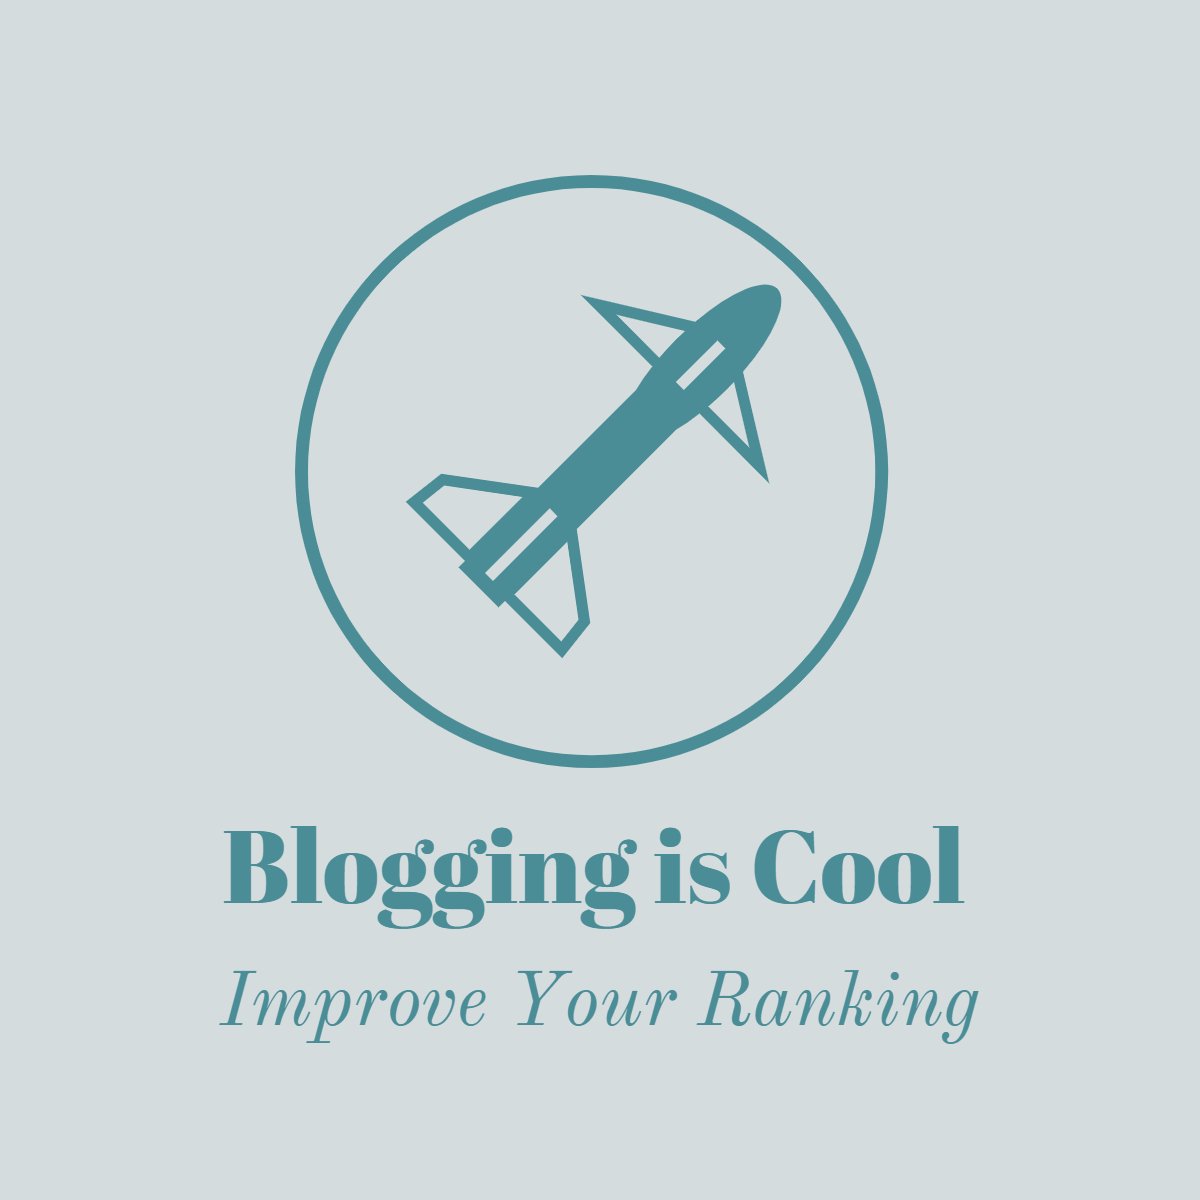 bloggingiscool.com teaches bloggers about how to become better at blogging